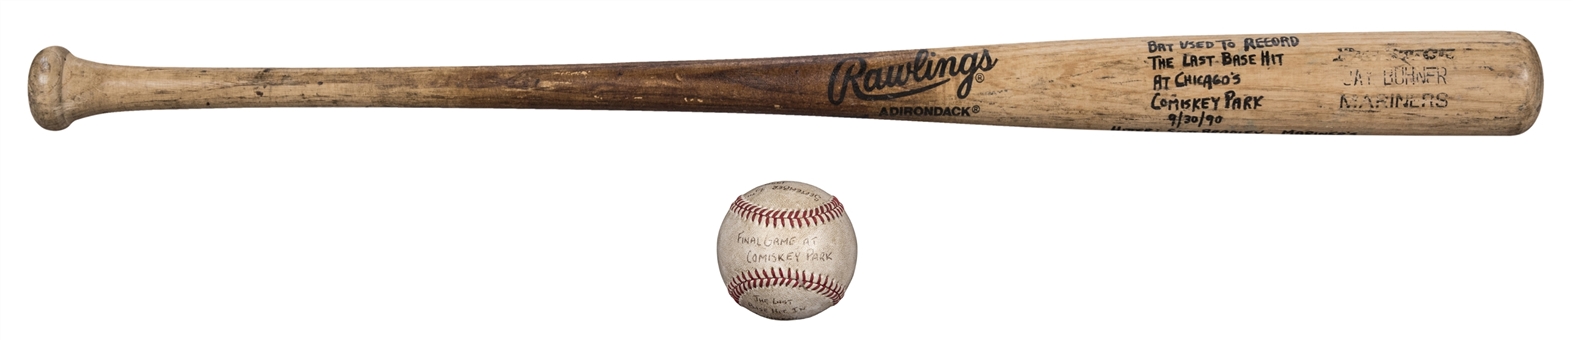 1990 Scott Bradley Game Used and Signed Rawlings Bat and Game Used Baseball for Last Hit Ever at Comiskey Park on 09/30/1990 (Bradley LOA) 